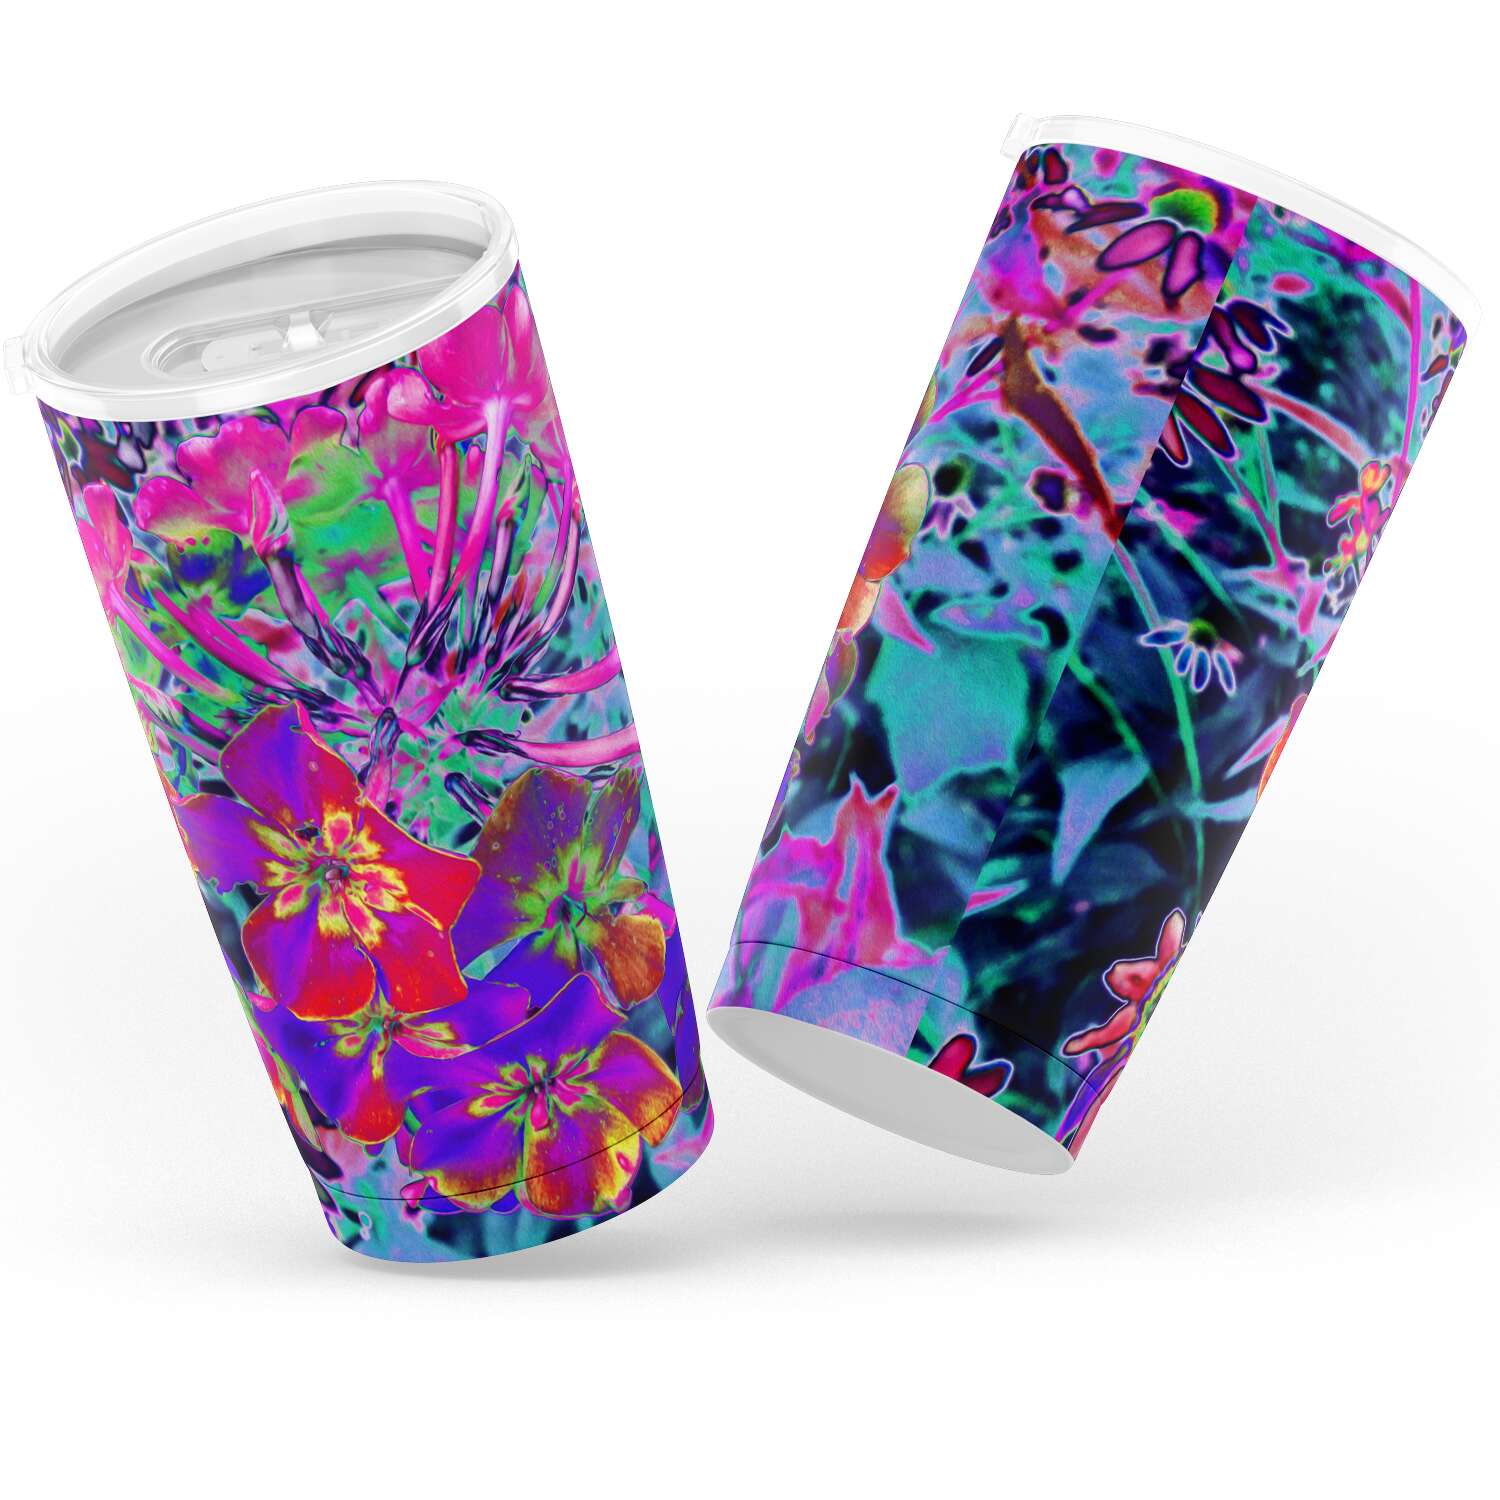 Travel Tumblers, Dramatic Psychedelic Colorful Red and Purple Flowers